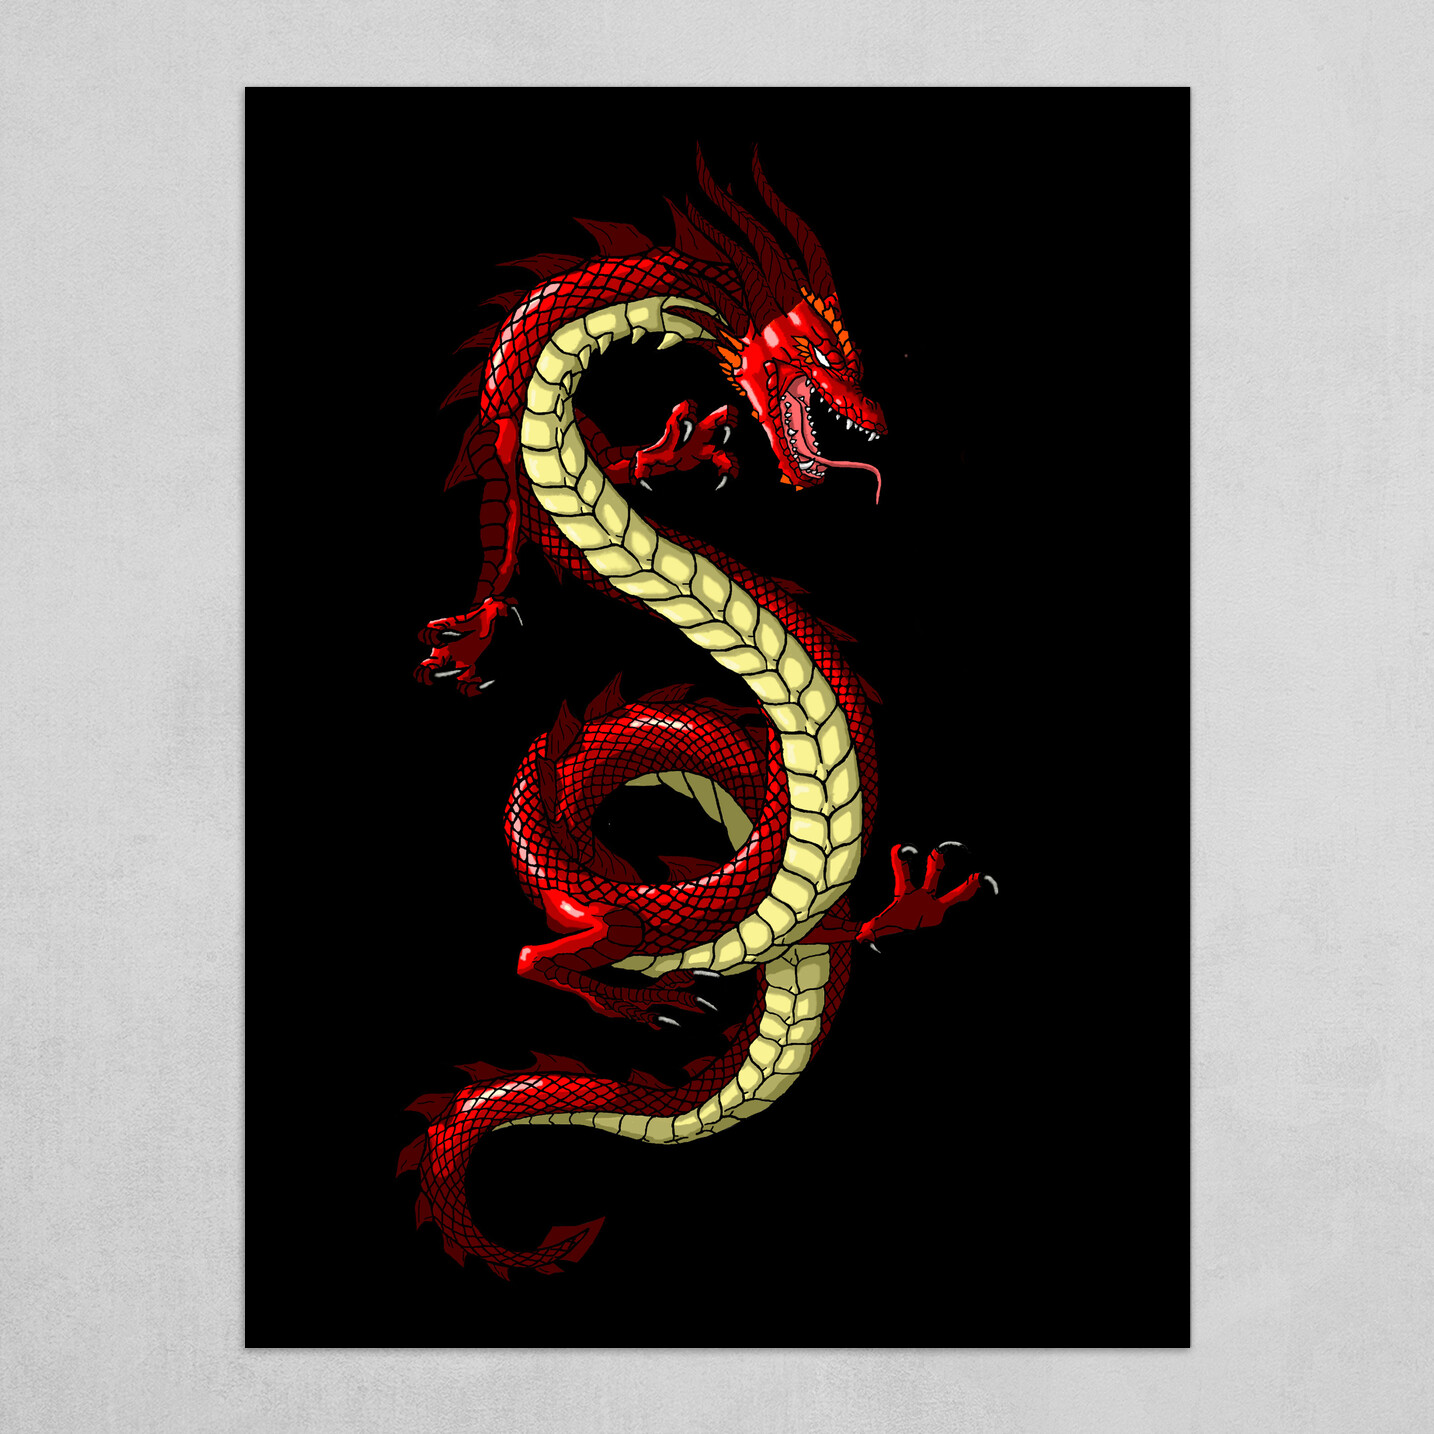 Black and White Chinese Dragon Best Temporary Tattoos| WannaBeInk.com